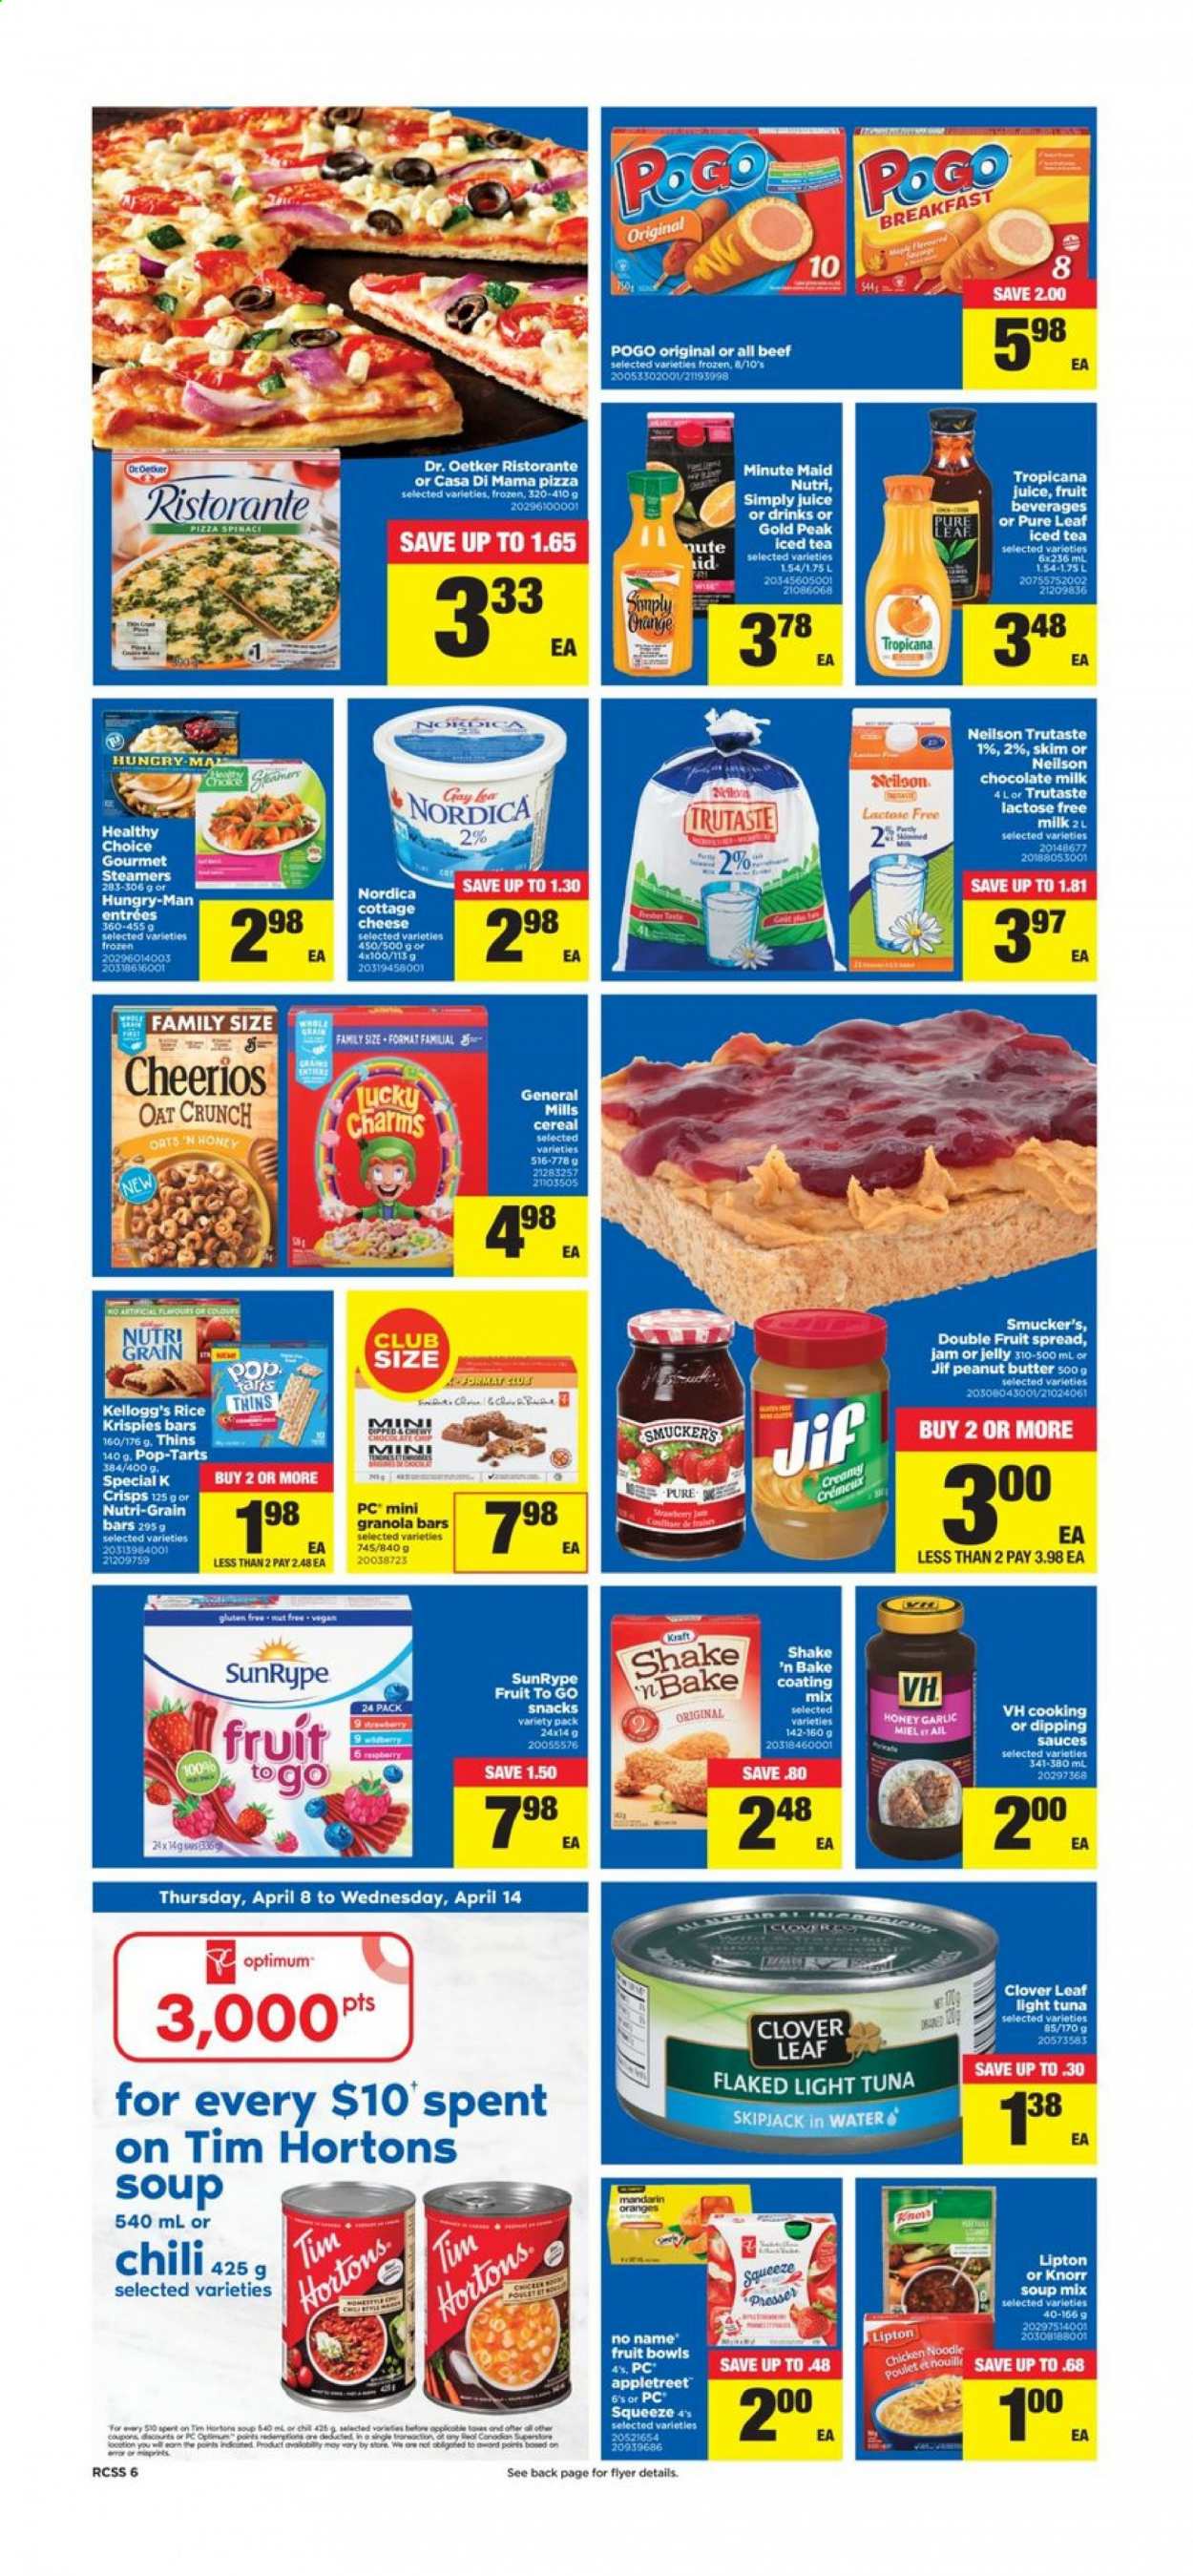 thumbnail - Circulaire Real Canadian Superstore - 08 Avril 2021 - 14 Avril 2021 - Produits soldés - ail, oranges, pizza, Knorr, granola, miel, Kellogg's, Tropicana, Lipton. Page 6.